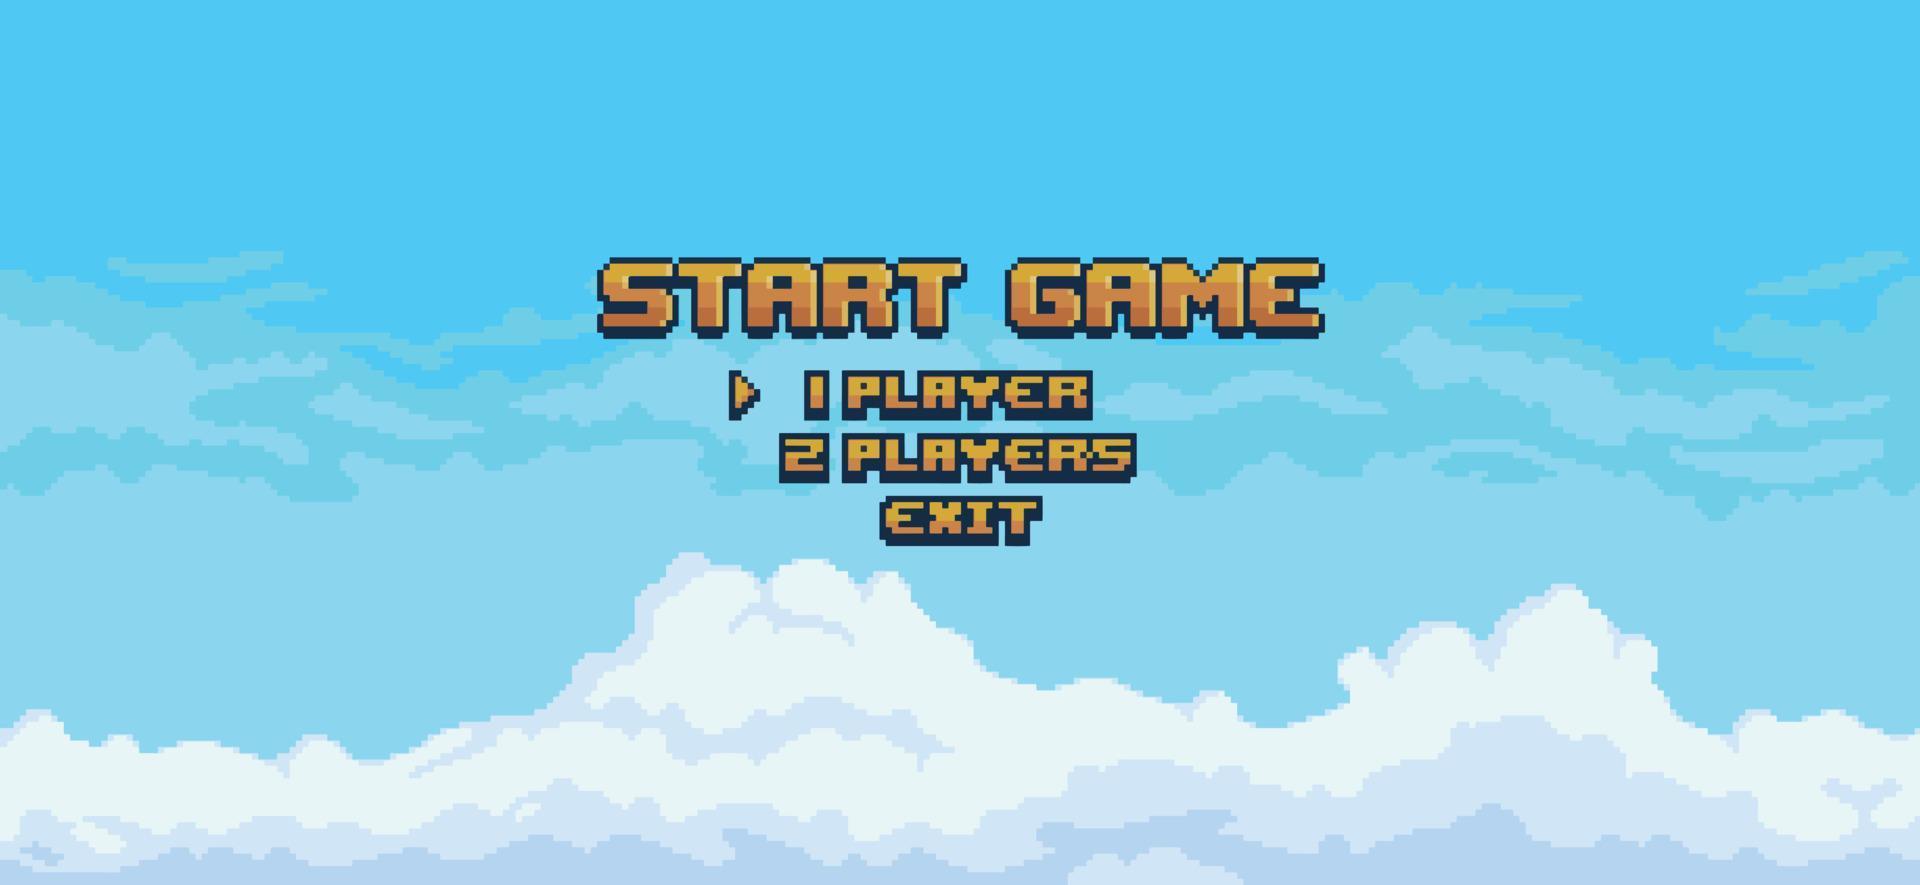 Pixel art game menu with sky and clouds background vector for 8bit game